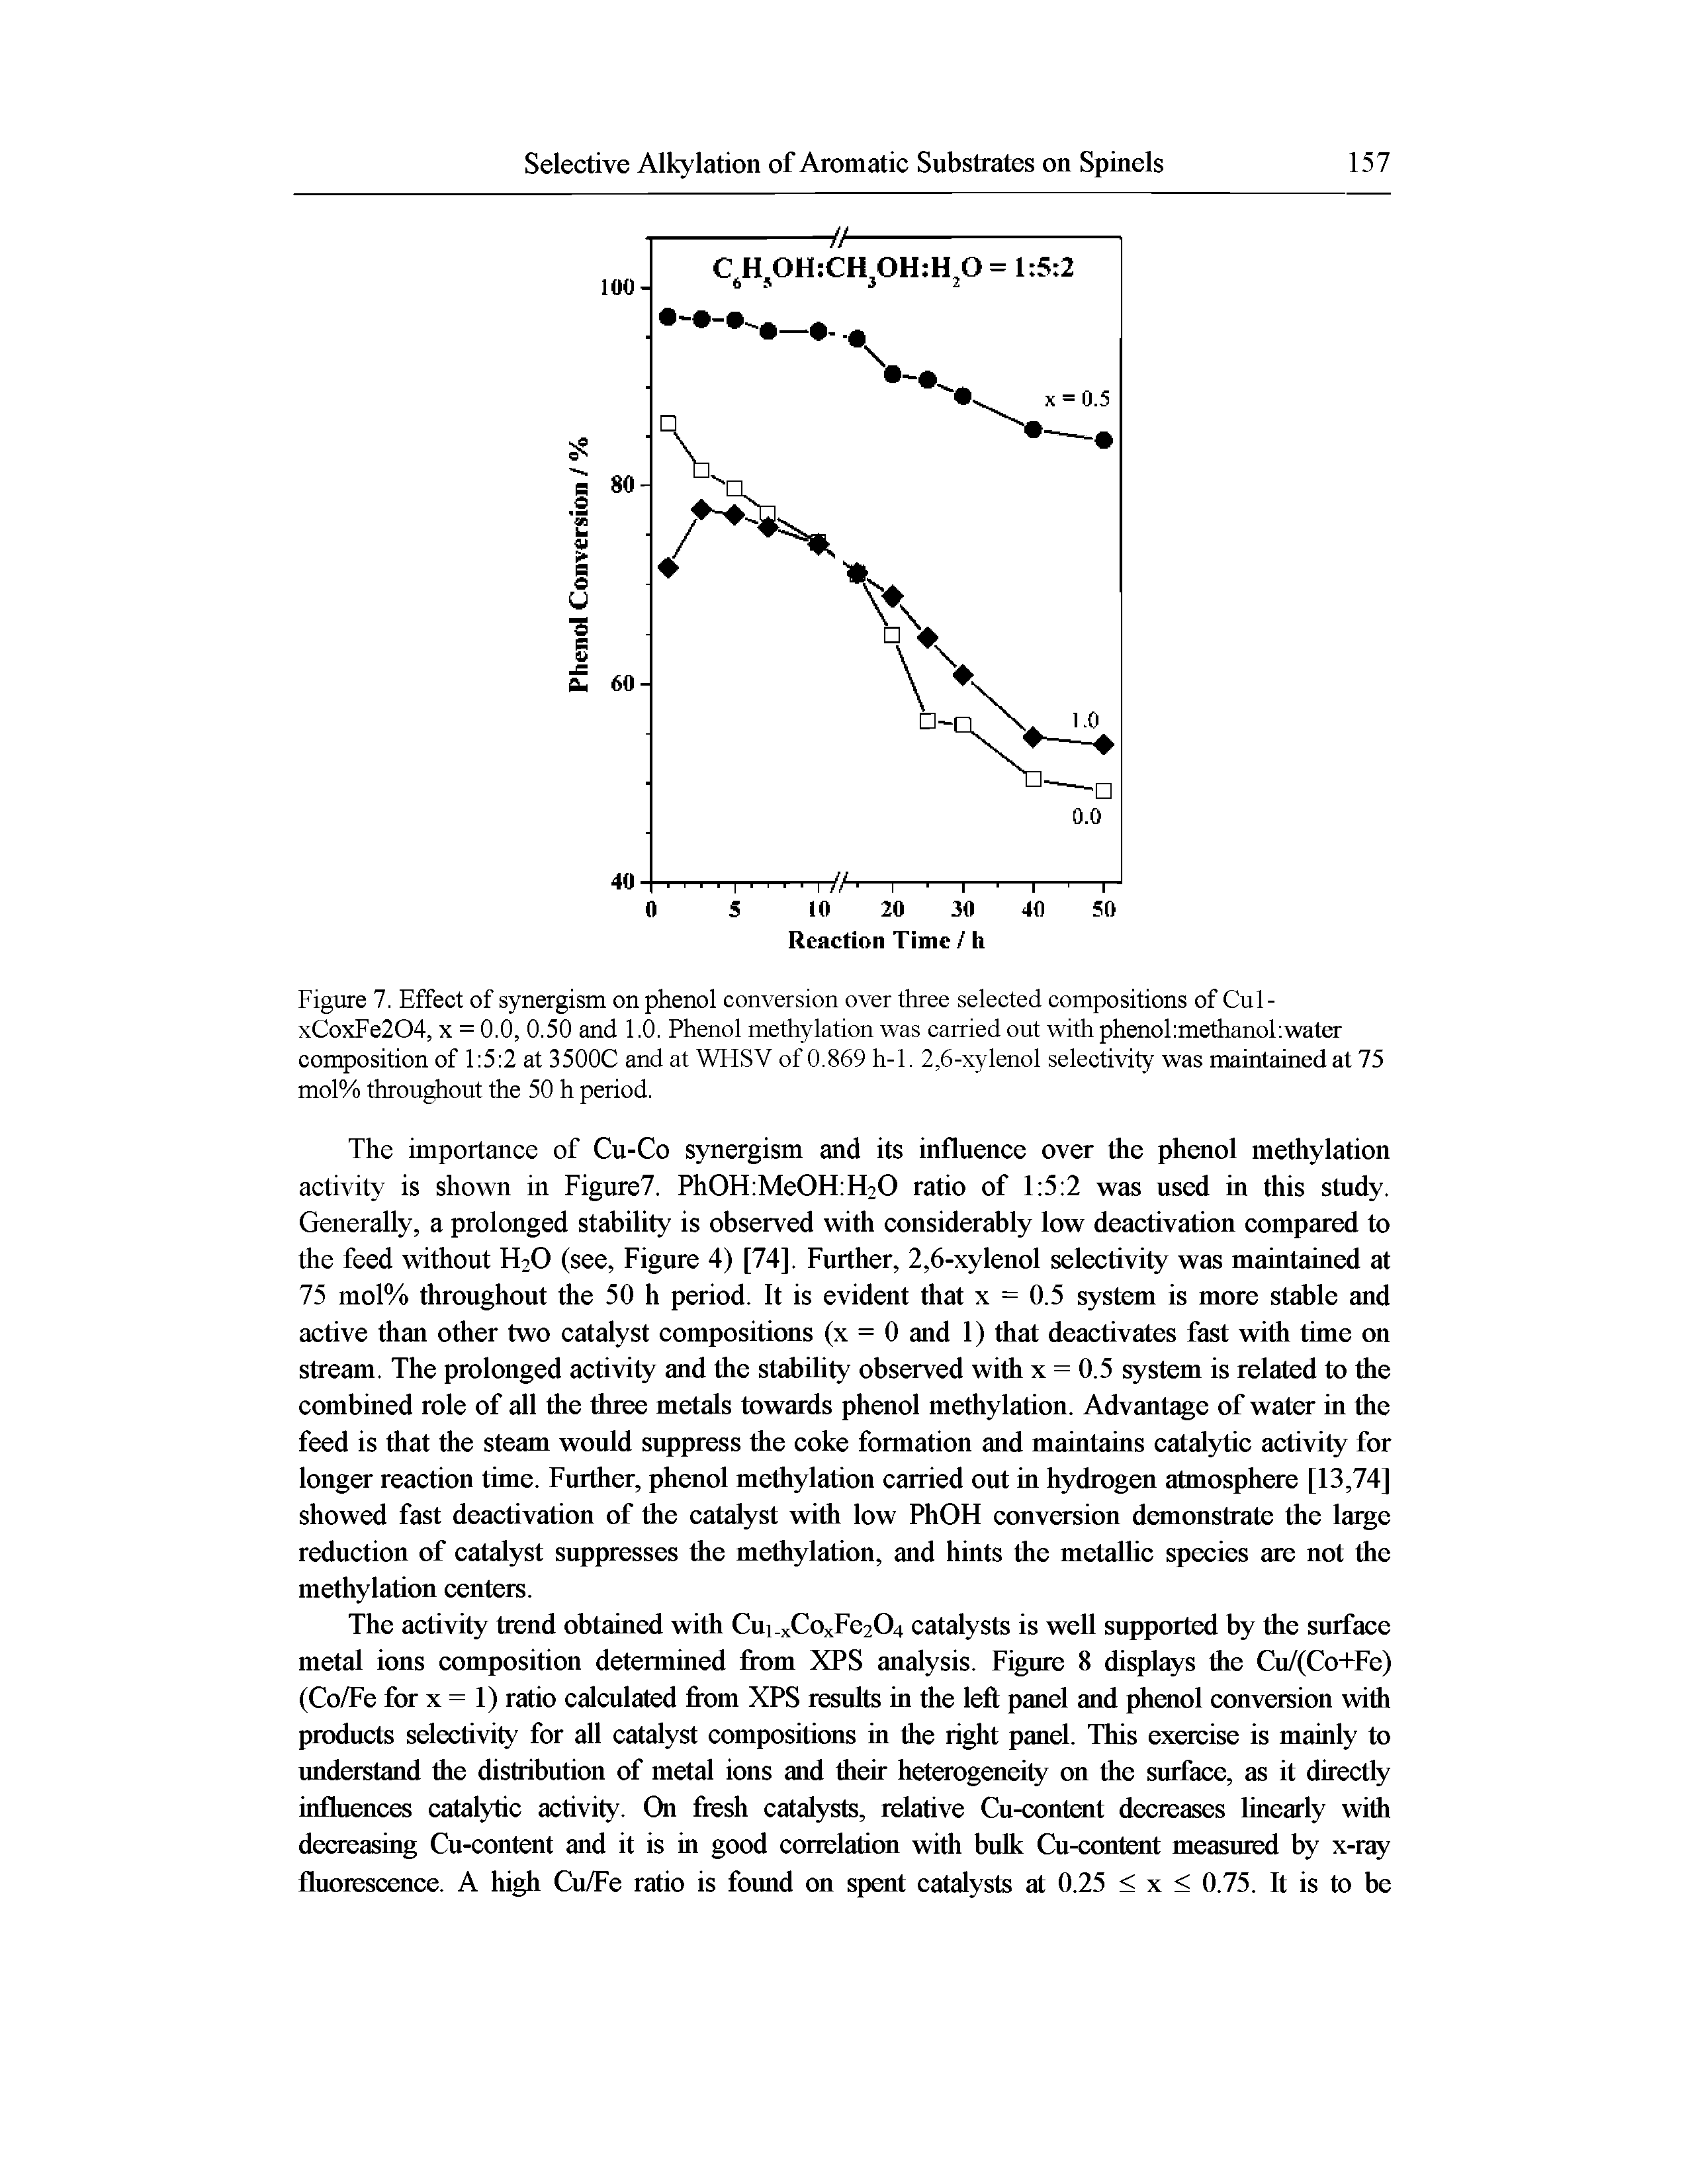 Figure 7. Effect of synergism on phenol conversion over three selected compositions of Cul-xCoxFe204, x = 0.0, 0.50 and 1.0. Phenol methylation was carried out with phenohmethanohwater composition of 1 5 2 at 3500C and at WFISV of 0.869 h-1. 2,6-xylenol selectivity was maintamedat 75 mol% throughout the 50 h period.